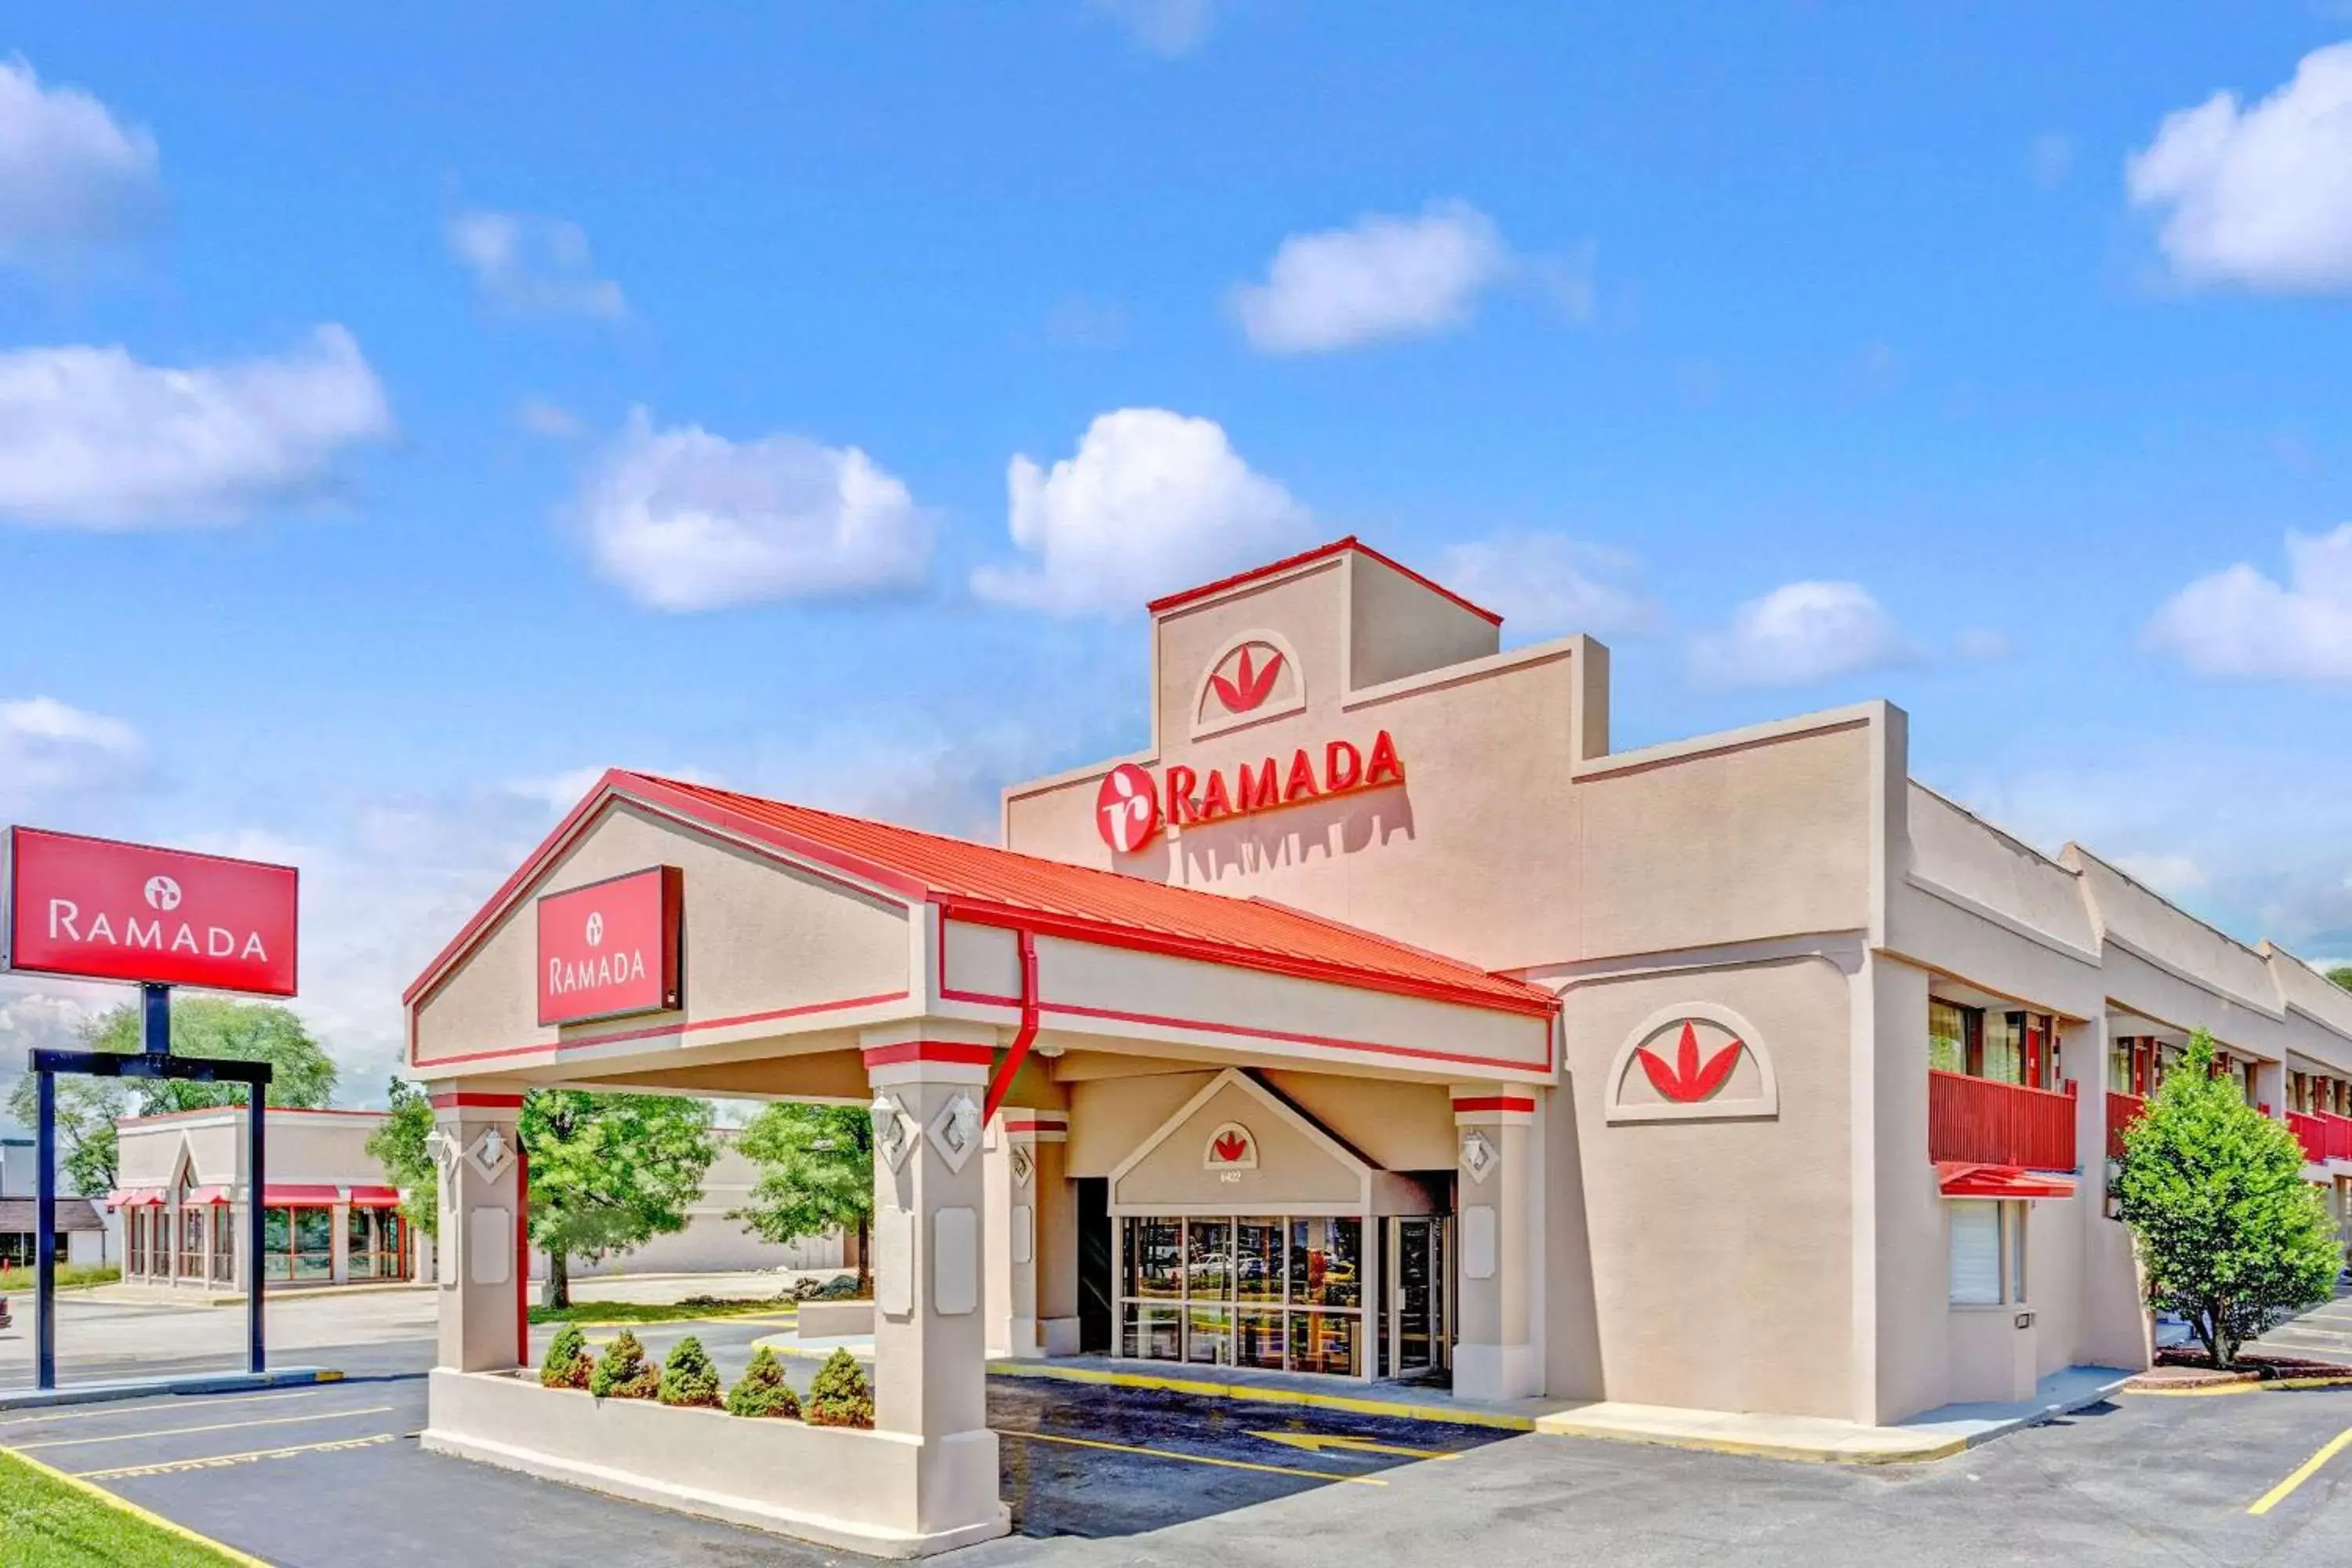 Property building in Ramada by Wyndham Baltimore West